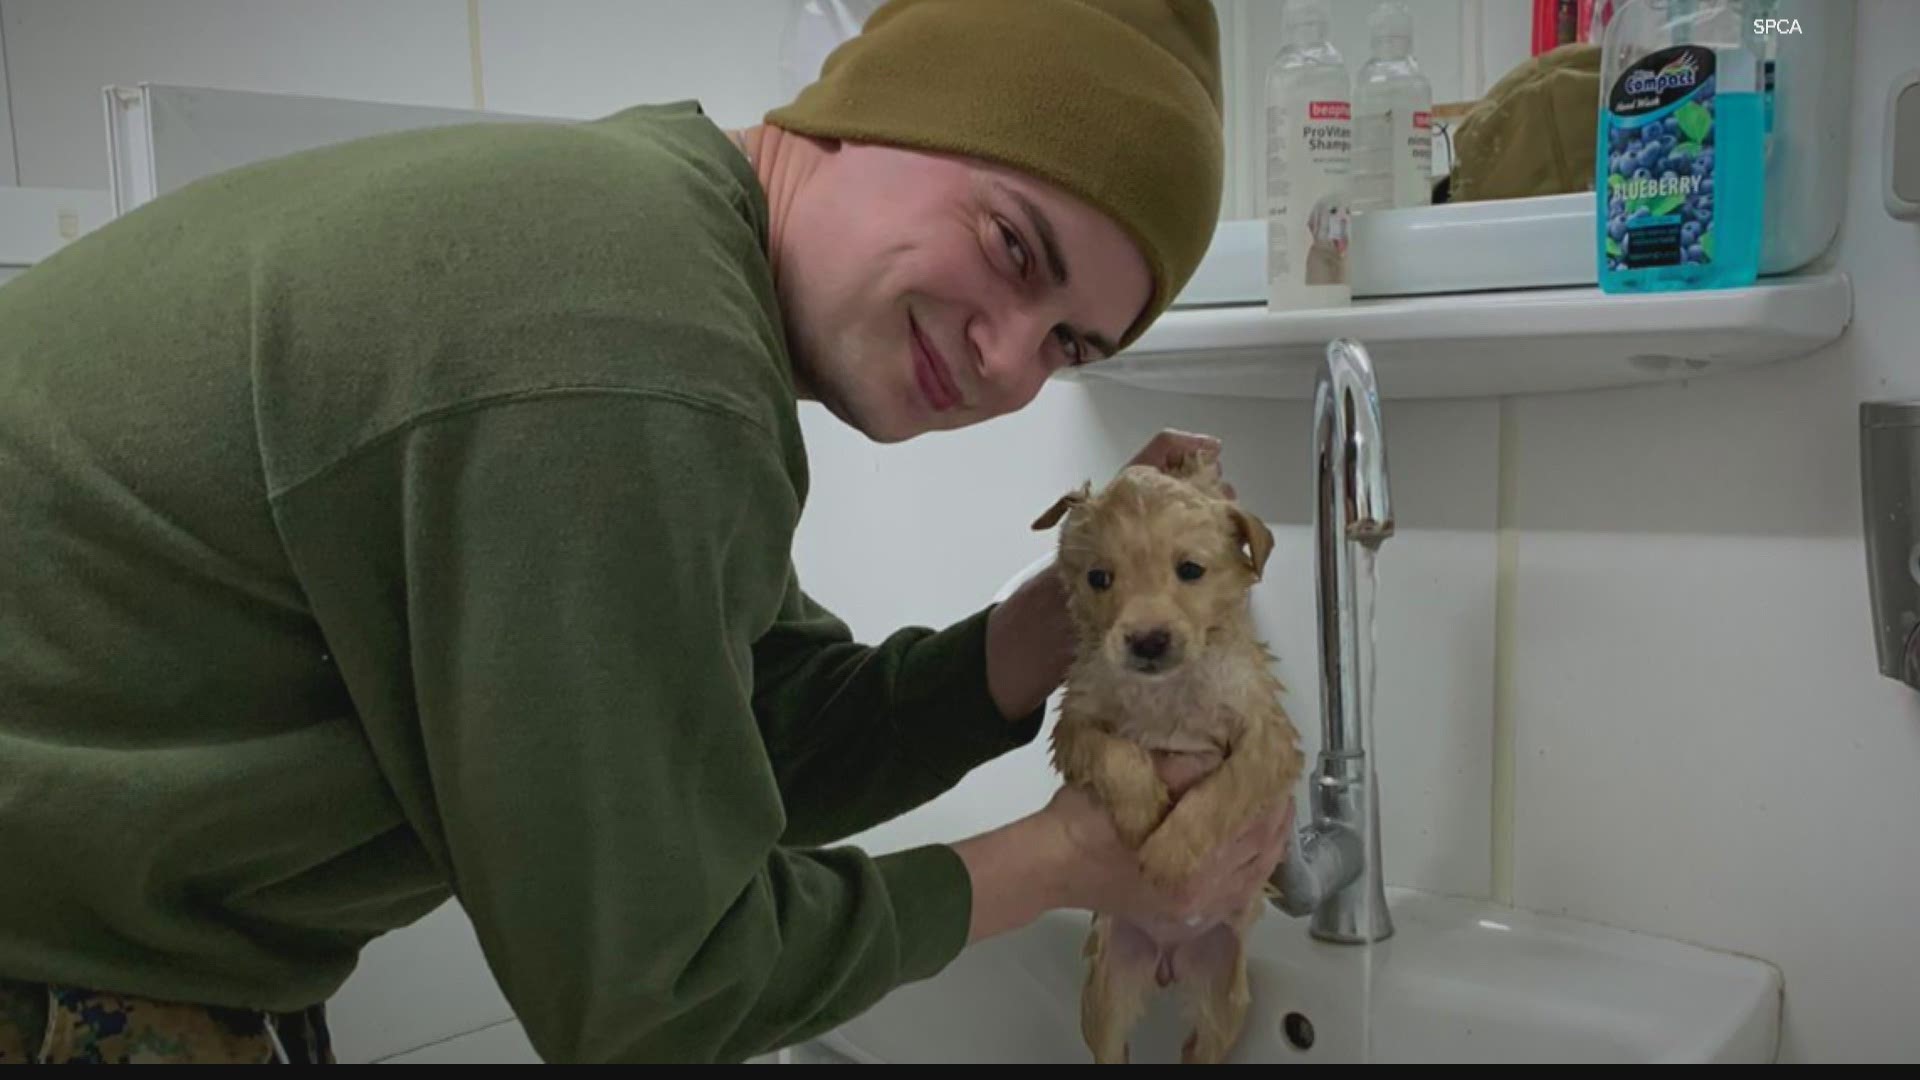 Brandon Carroll spent his last day of deployment with a puppy he cared for outside the compound. They reunited in Indianapolis a few months later.